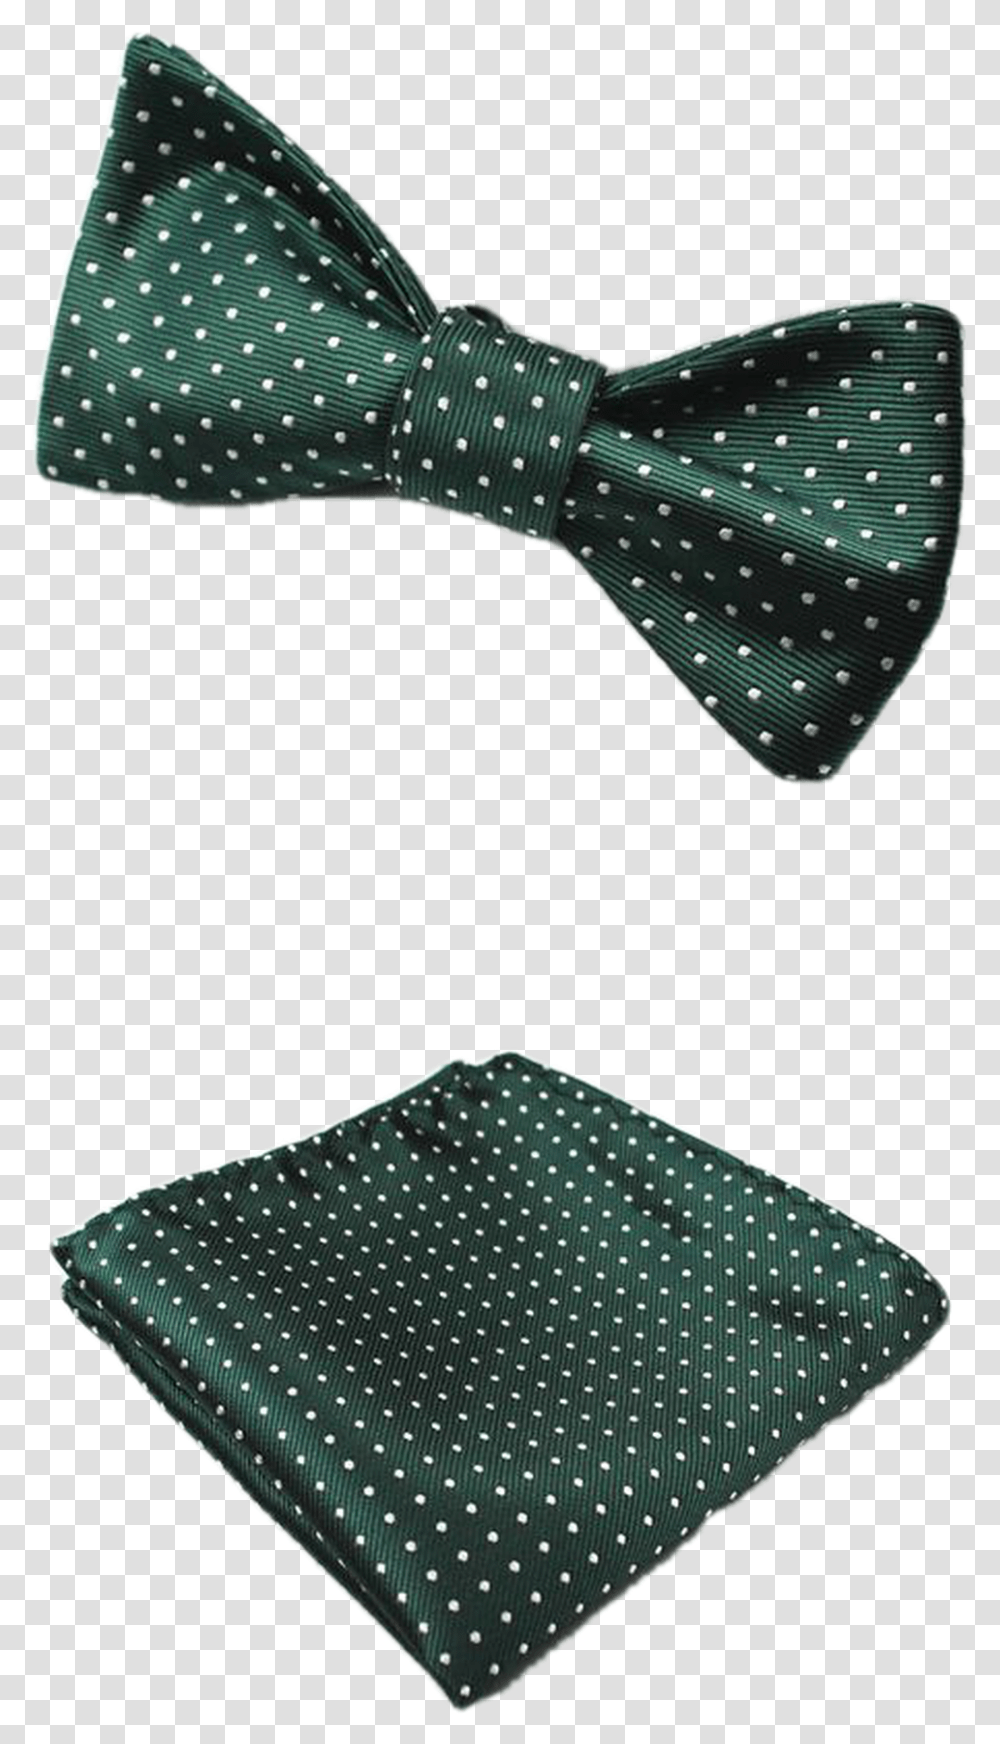 Green And White Polka Dot Bow Tie And Pocket Square Polka Dot, Accessories, Accessory, Necktie, Rug Transparent Png